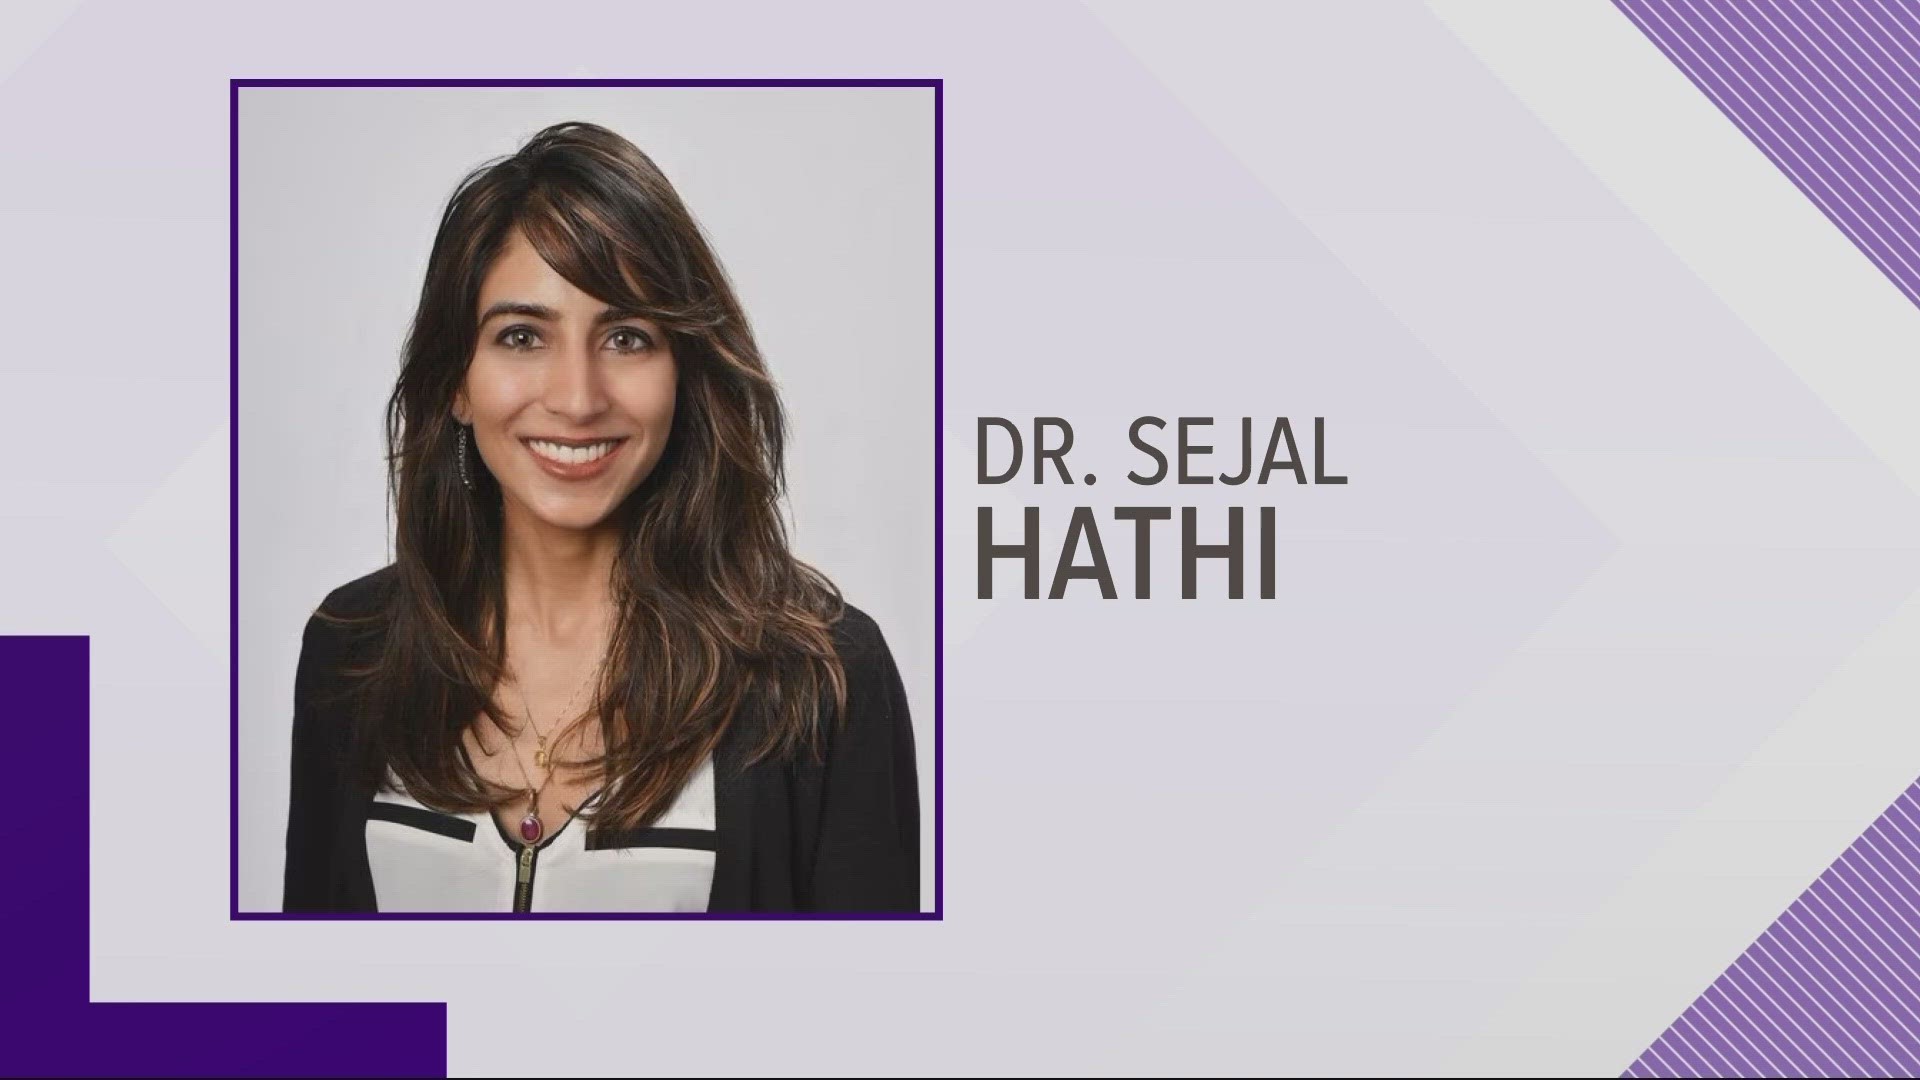 Dr. Sejal Hathi will take over for Dave Baden, the second interim director after the departure of former director Patrick Allen at the start of the year.